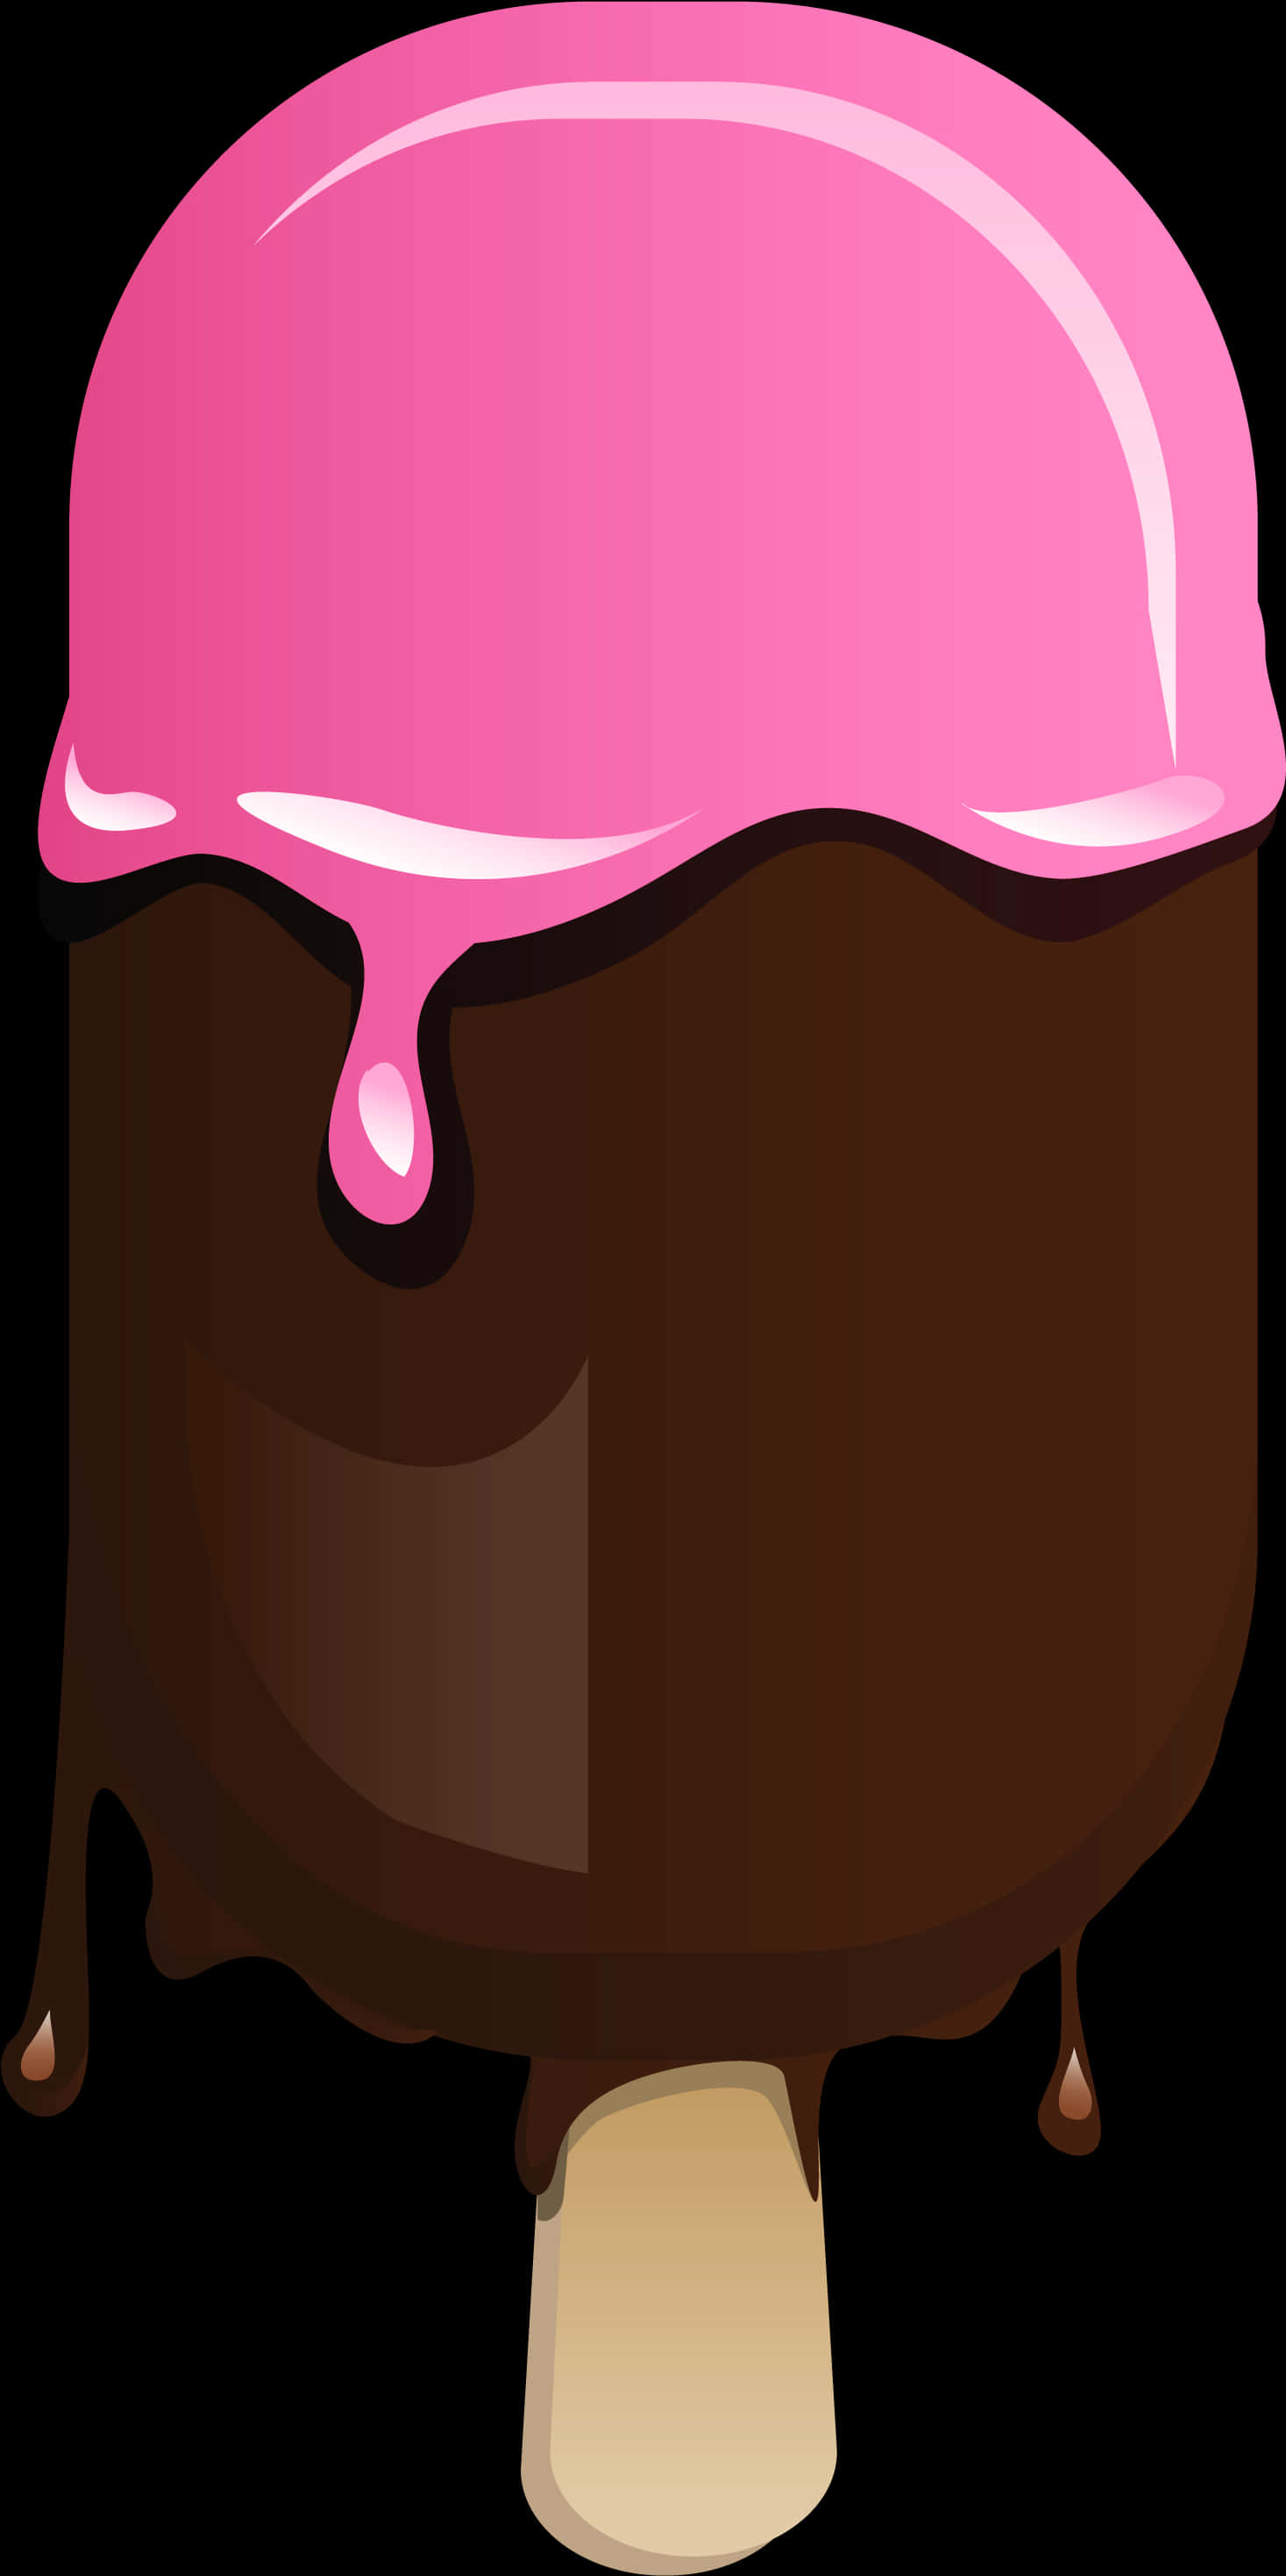 Chocolate Ice Cream Barwith Pink Topping Clipart PNG image